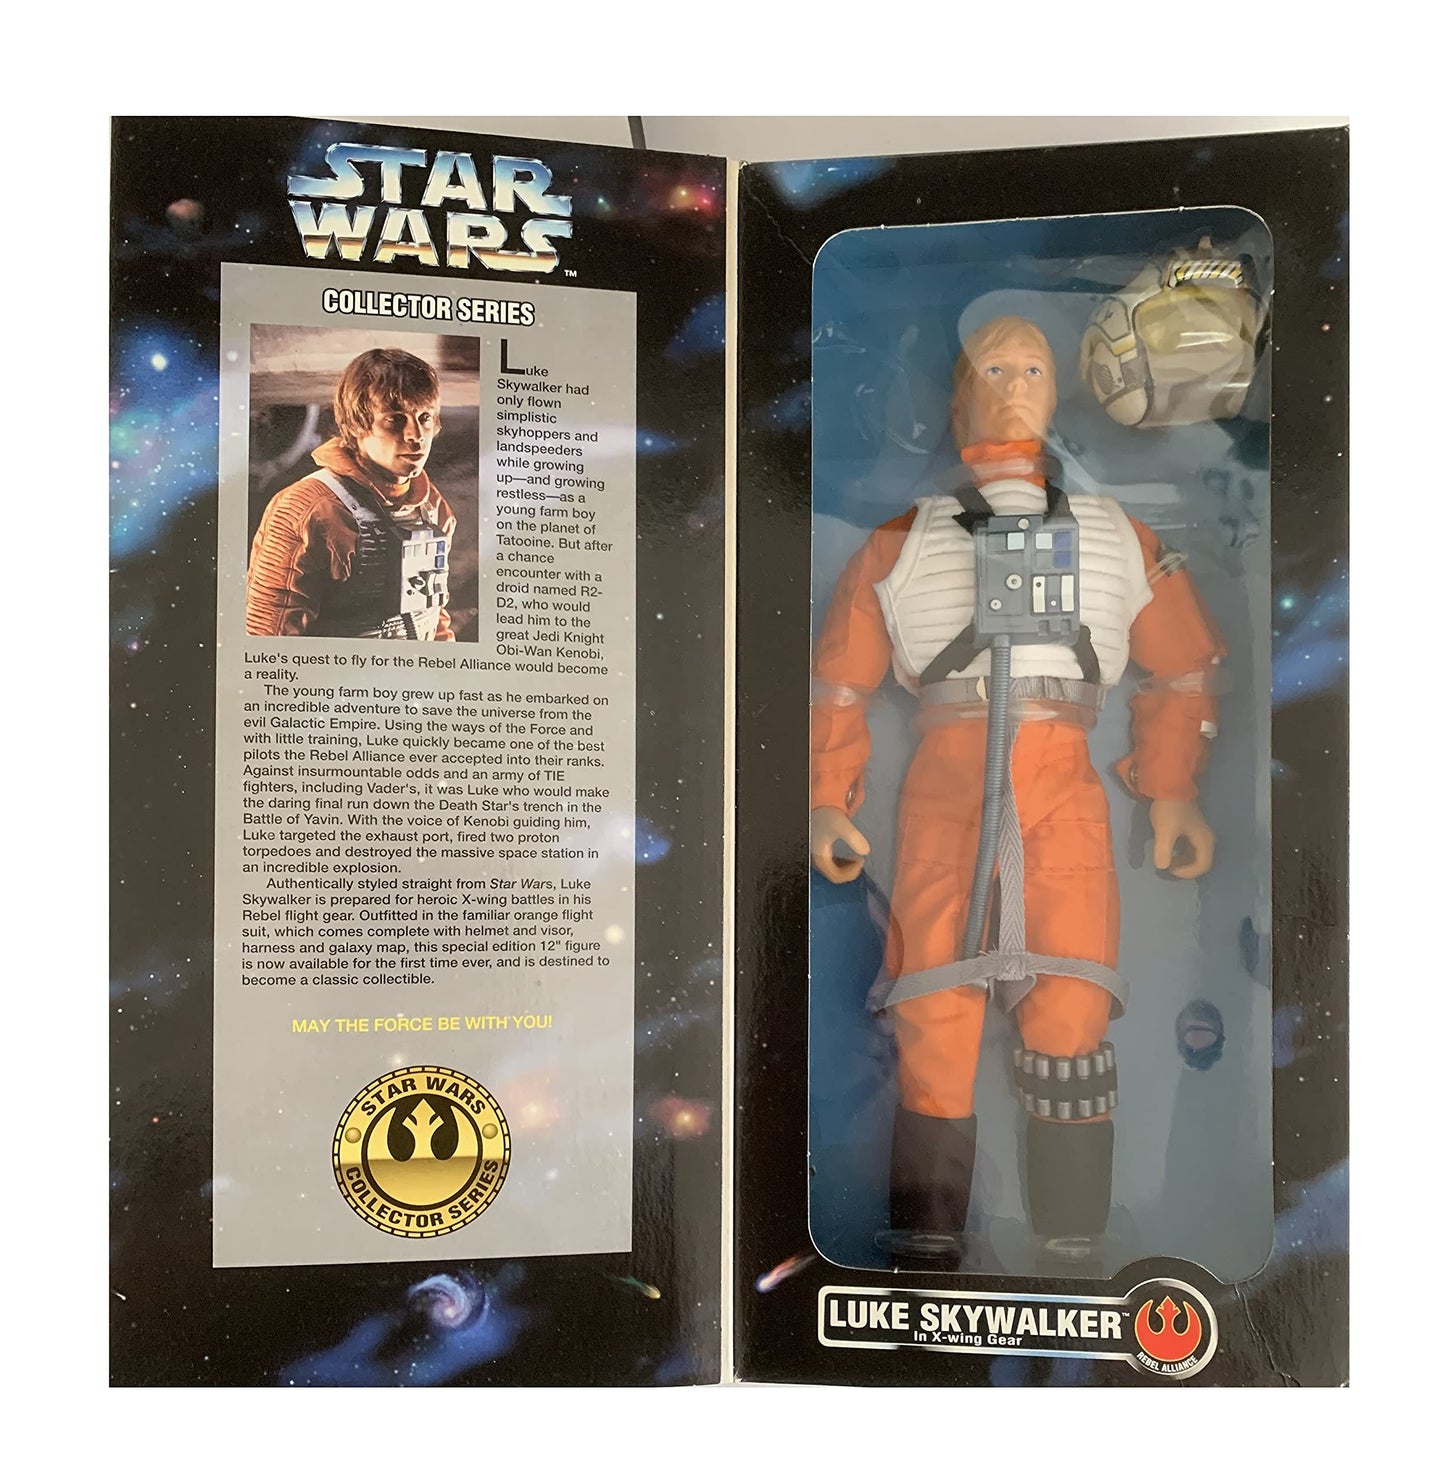 Vintage 1996 Star Wars Collector Series Luke Skywalker In X-Wing Gear 12 Inch Fully Poseable Action Figure, Authentically Styled Outfit and Accessories - Brand New Shop Stock Room Find